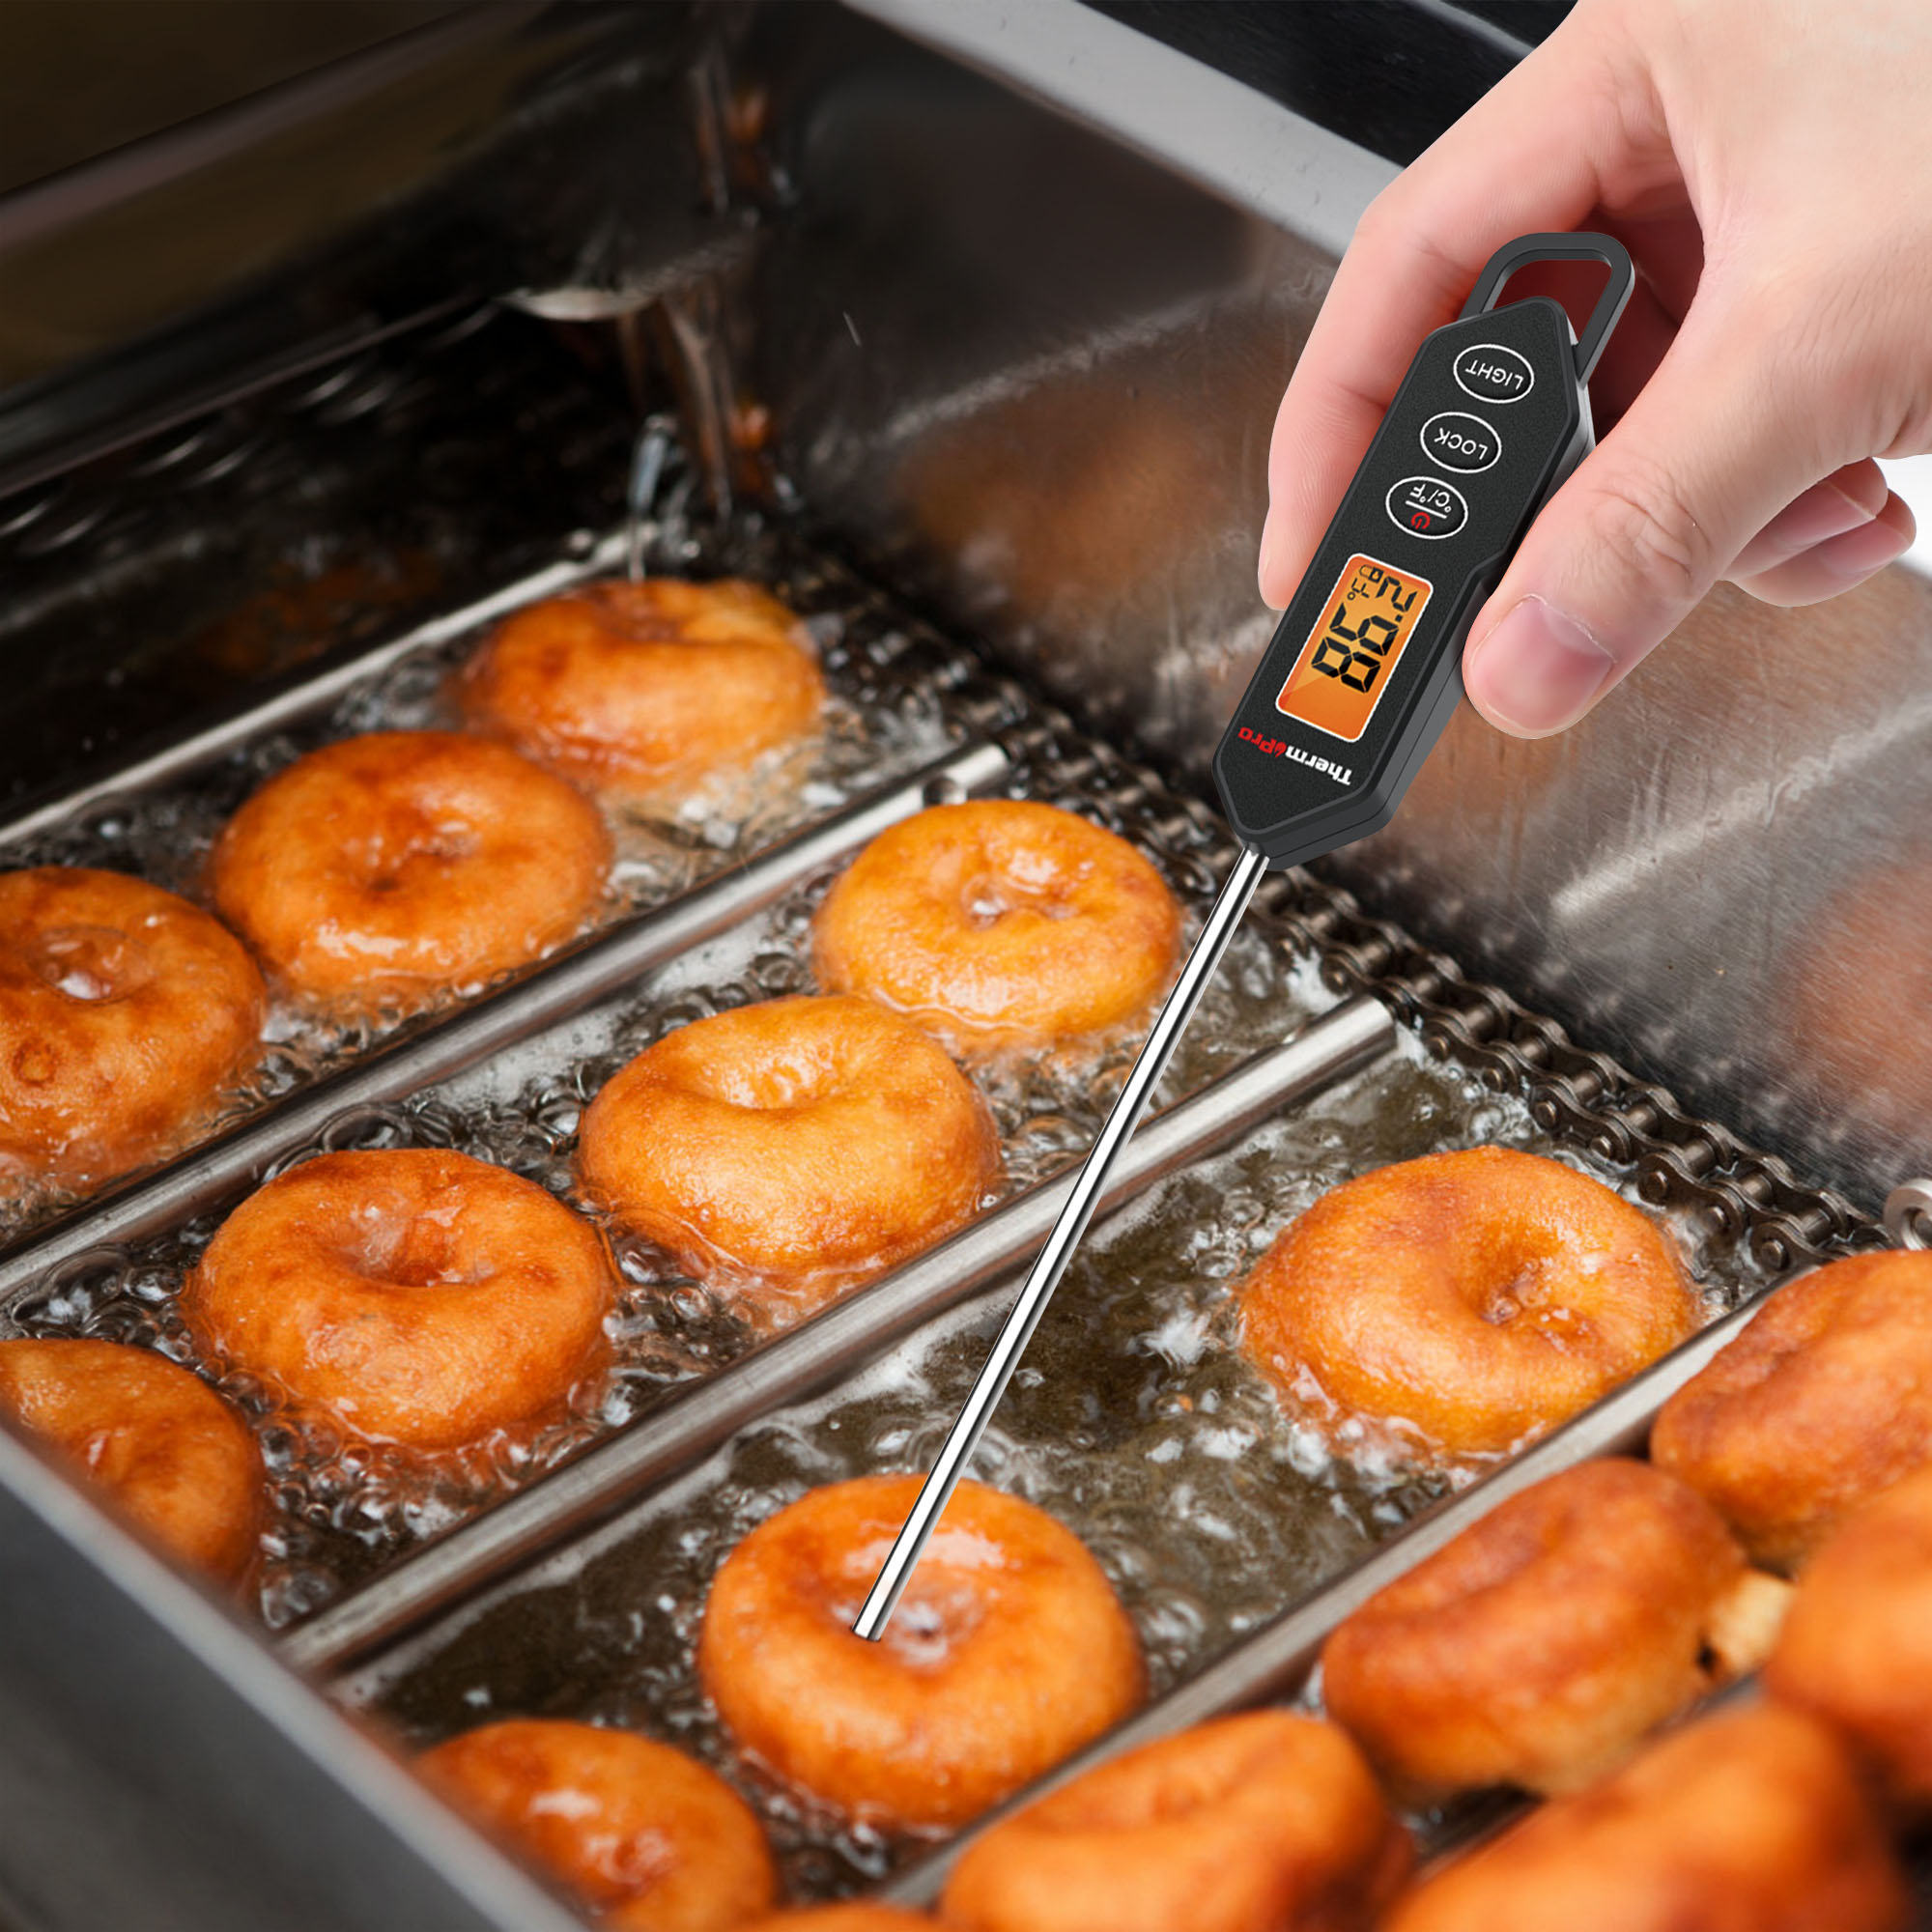 ThermoPro TP01HW LCD Grill/Meat Thermometer